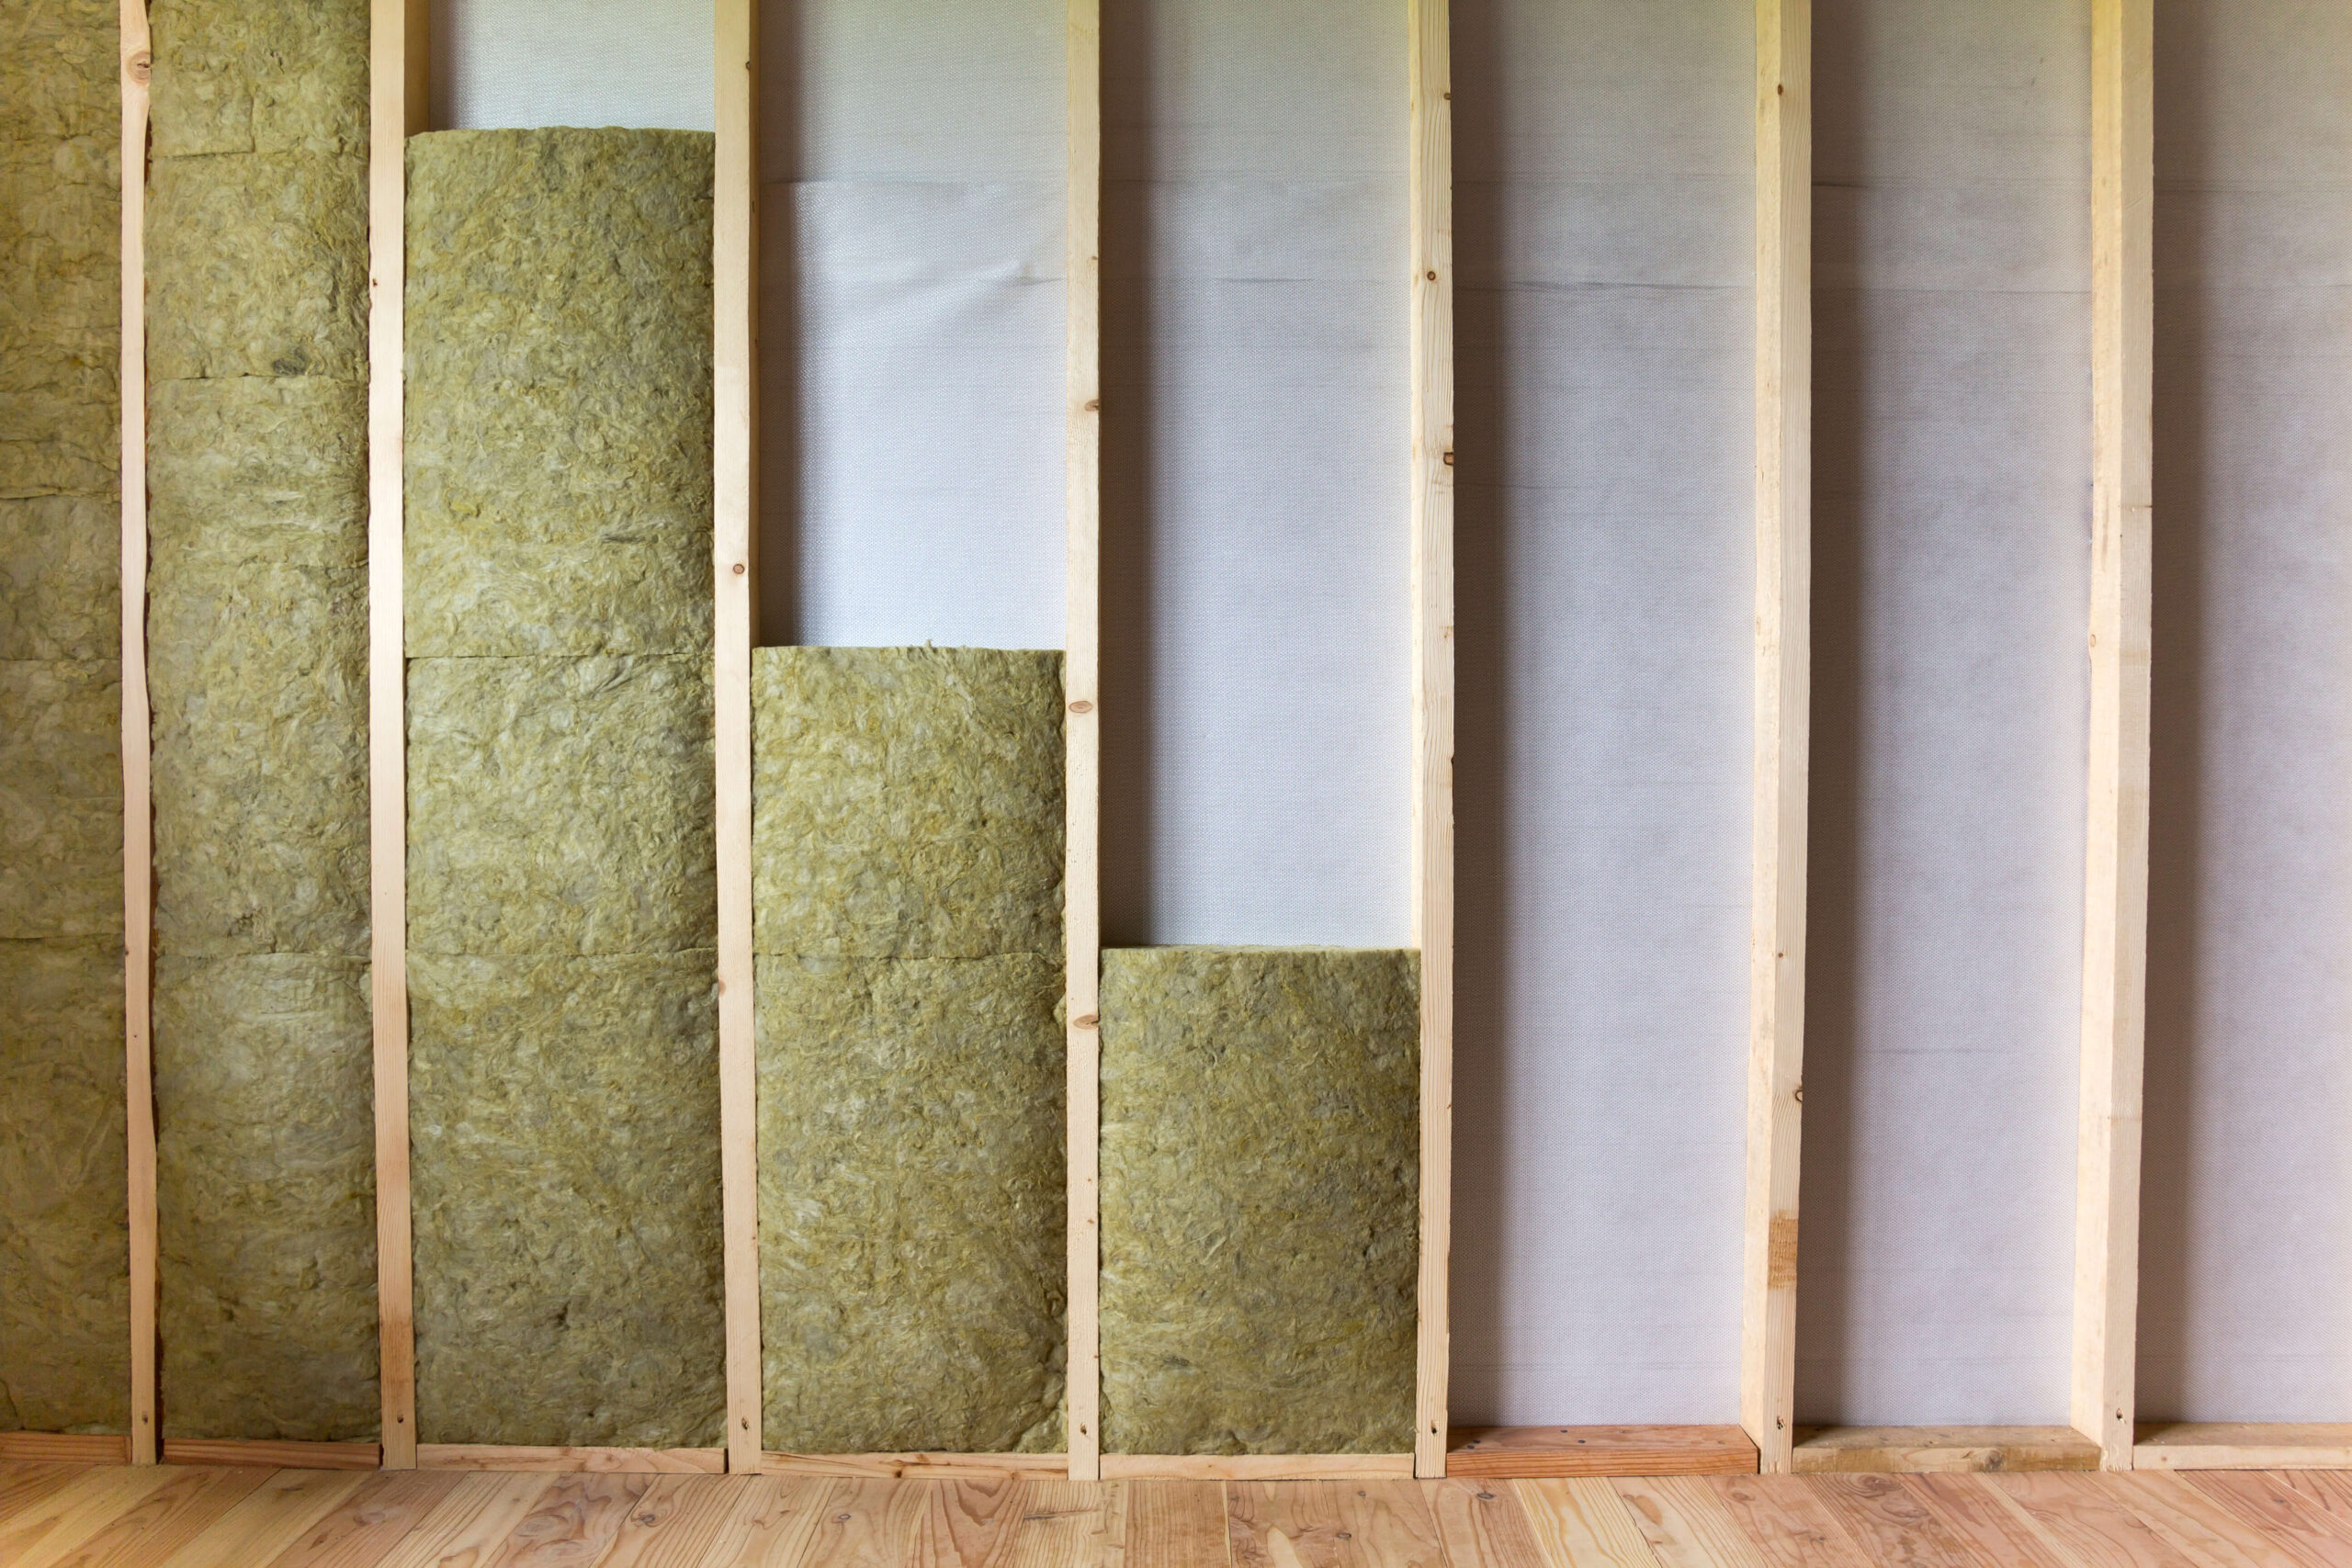 Insulation in a room with wood flooring.